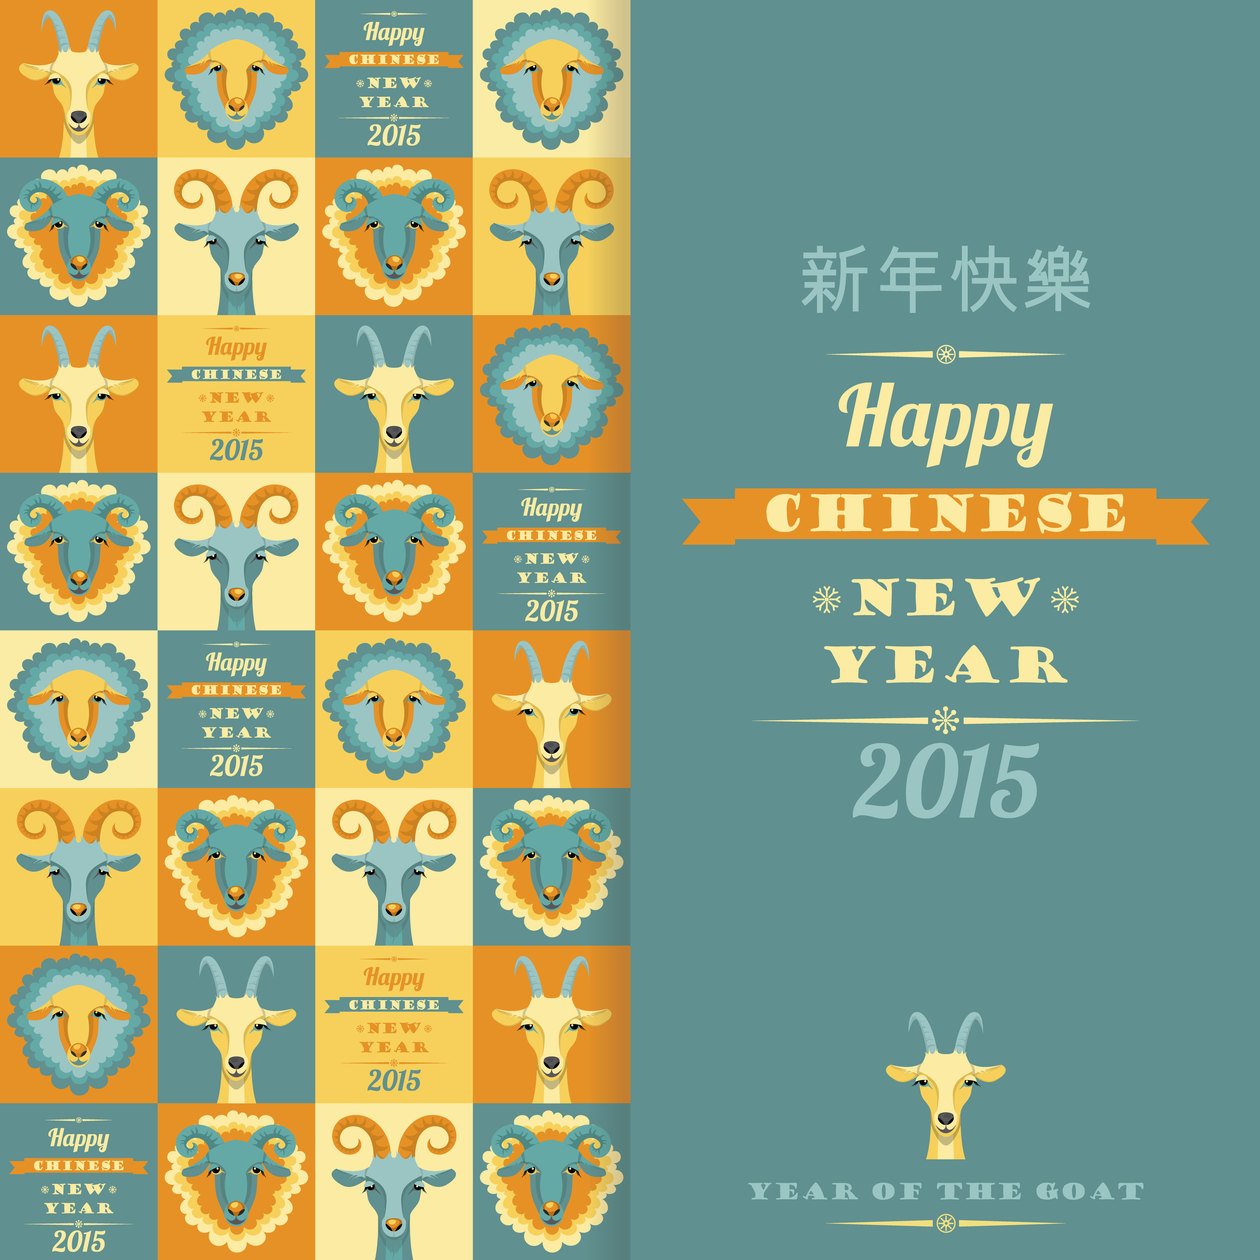 Happy Chinese New Year. Vector illustration of goat and sheep, symbol of 2015. Hipster style. Element for New Year's design. Image of 2015 year of the goat.  Photoshop brush